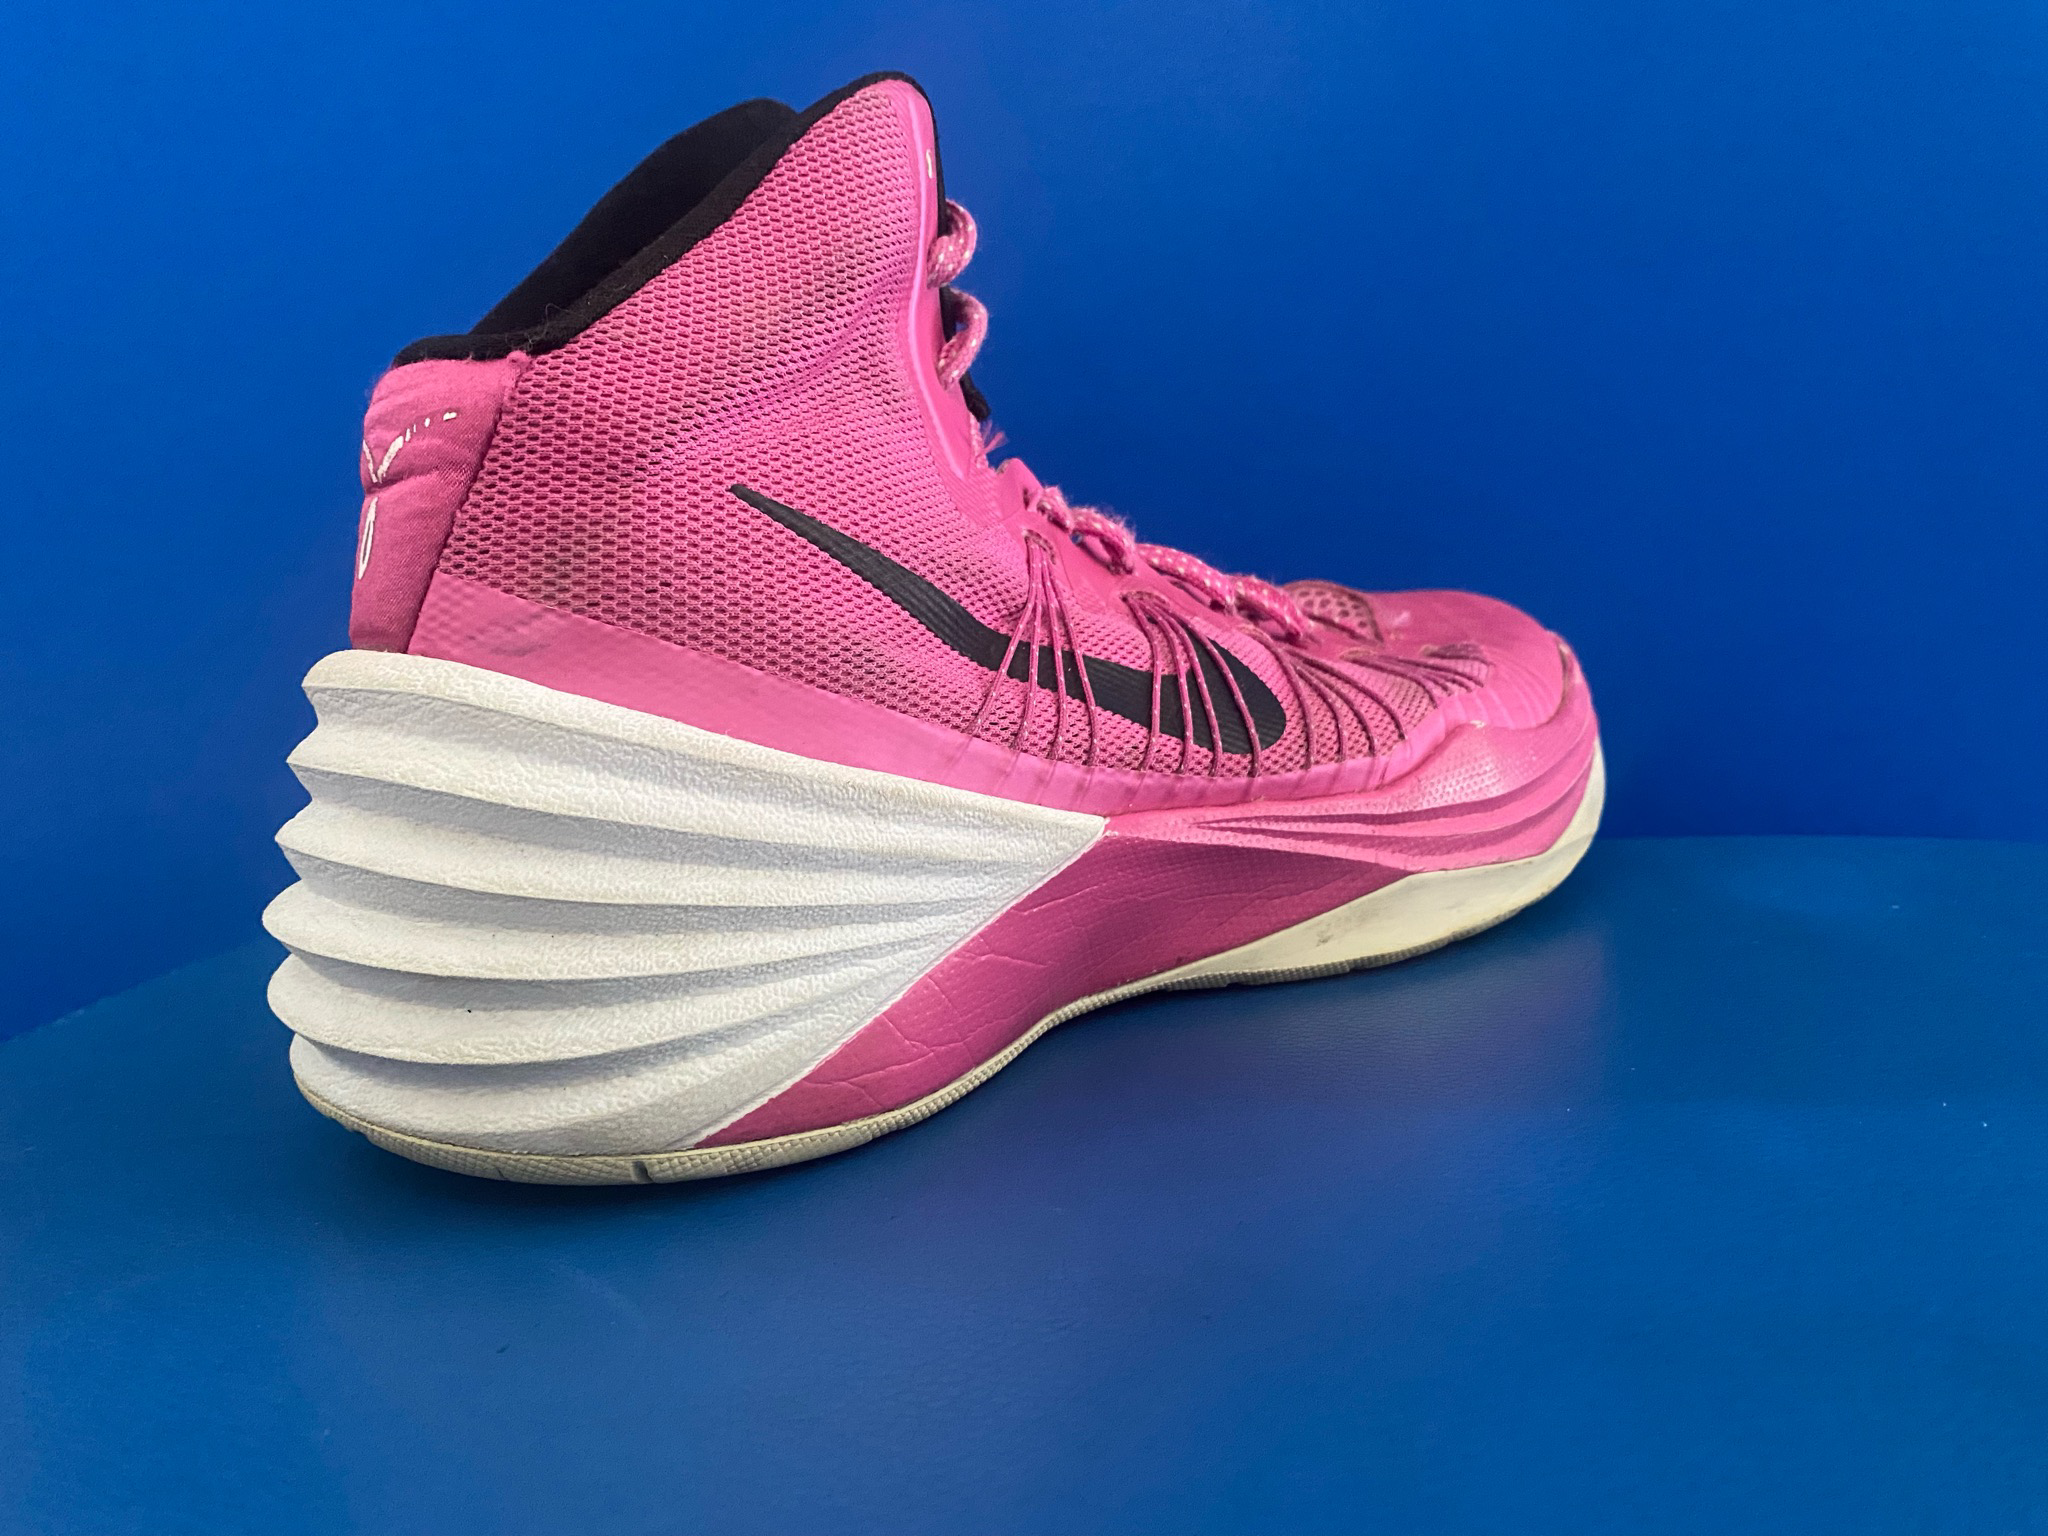 Perioperatieve periode puppy procedure Nike Hyperdunk 2013 Kay Yow 'Think Pink'599537-601 Basketball Shoes US9  (Near-new) (EC223)